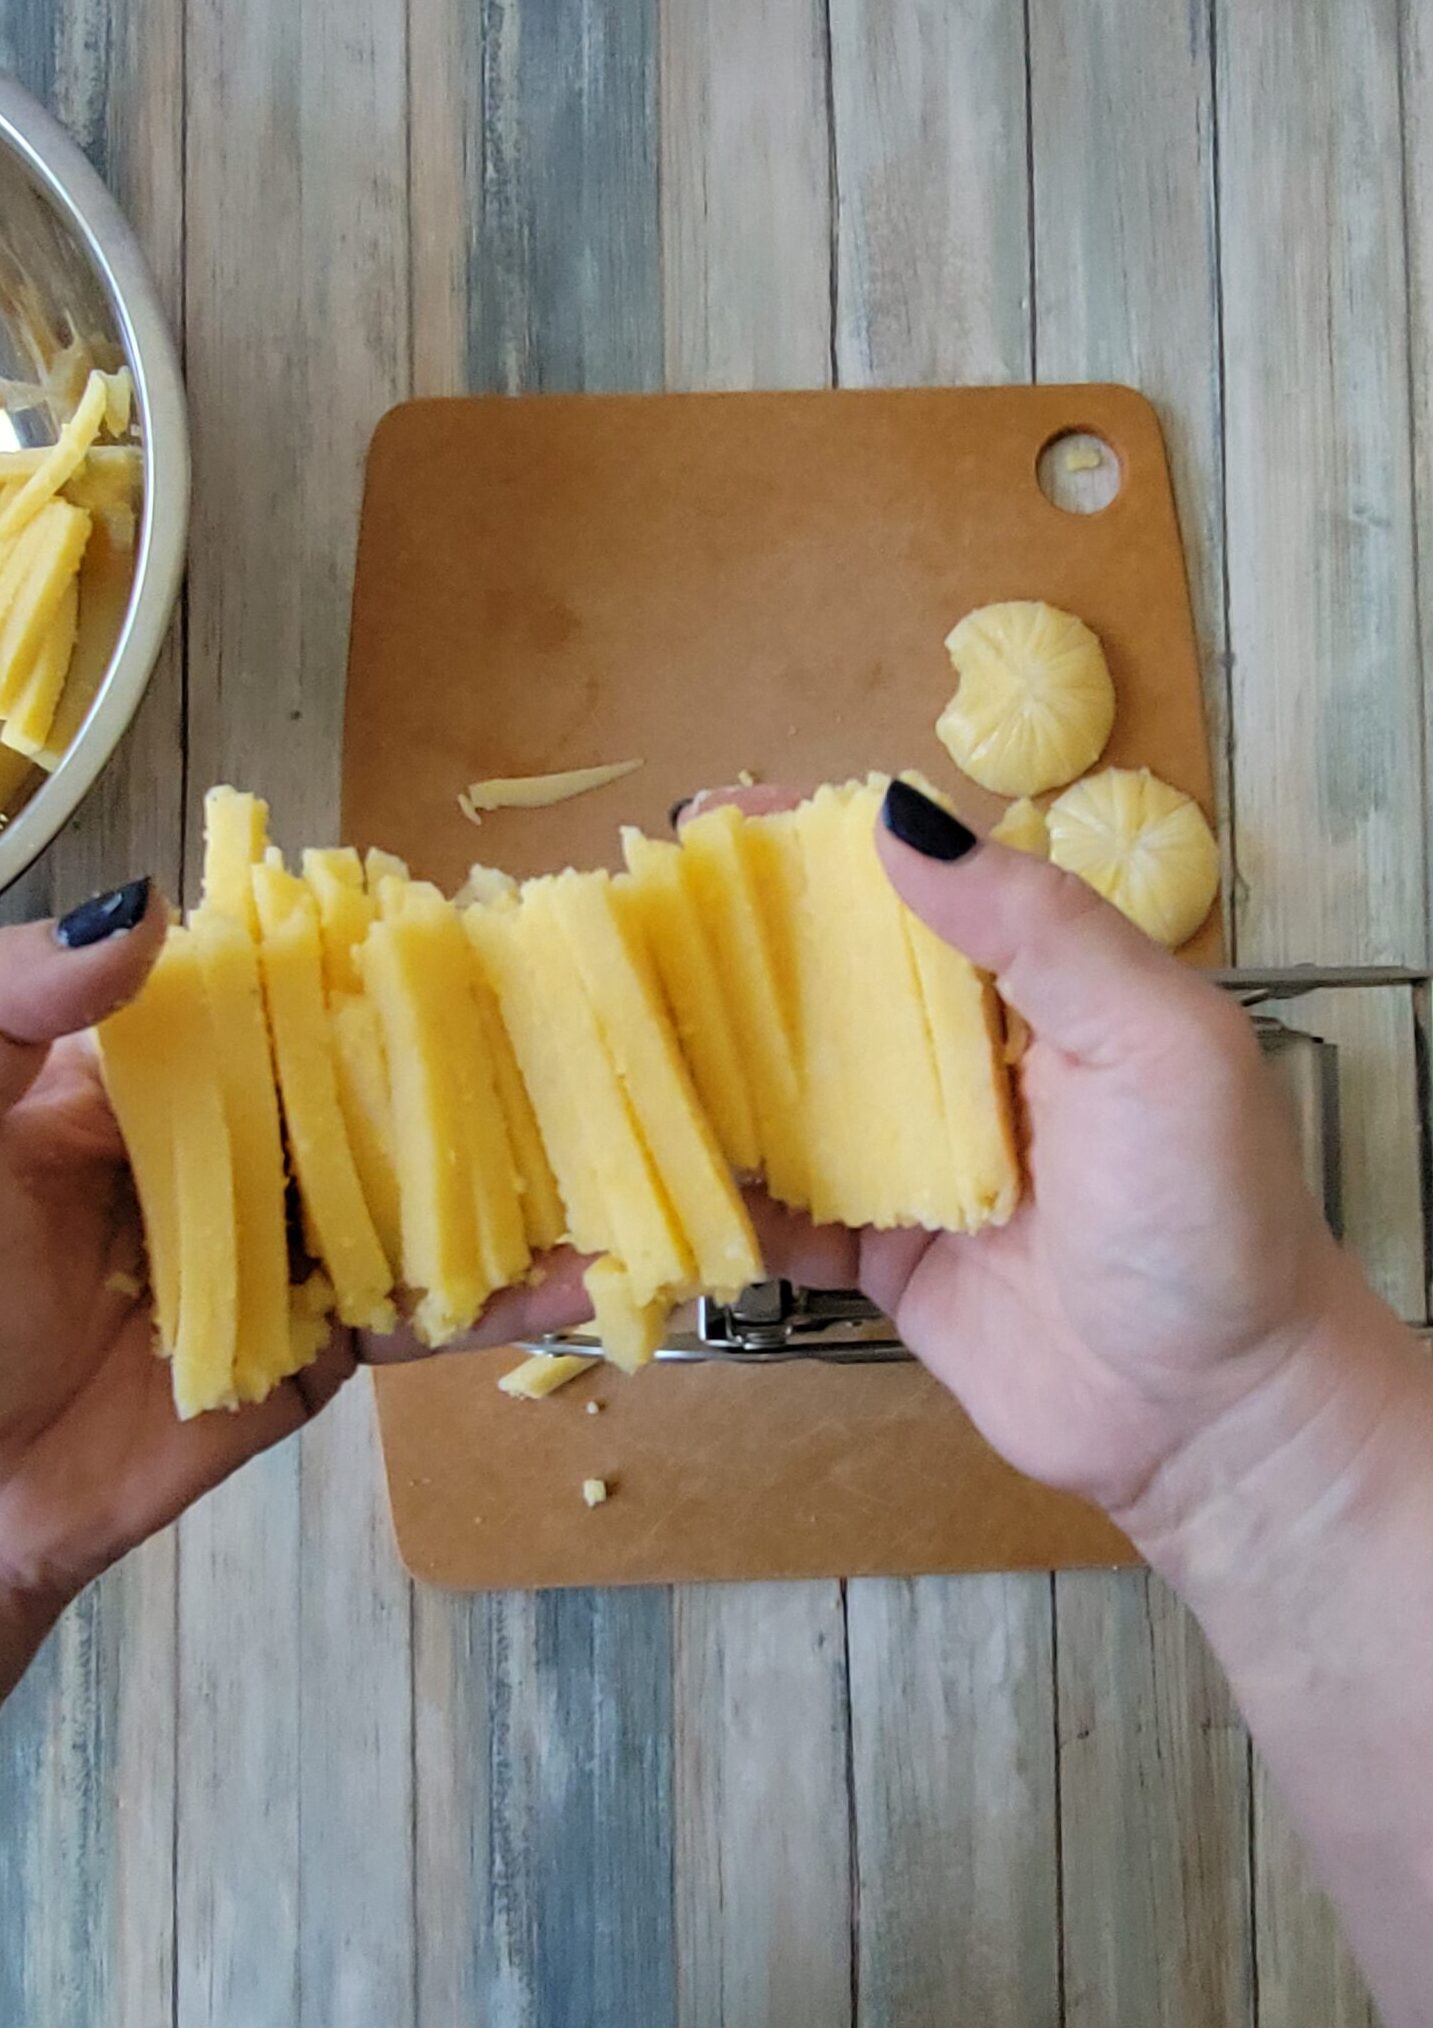 Using a french fry cutter to cut the polenta into fries.